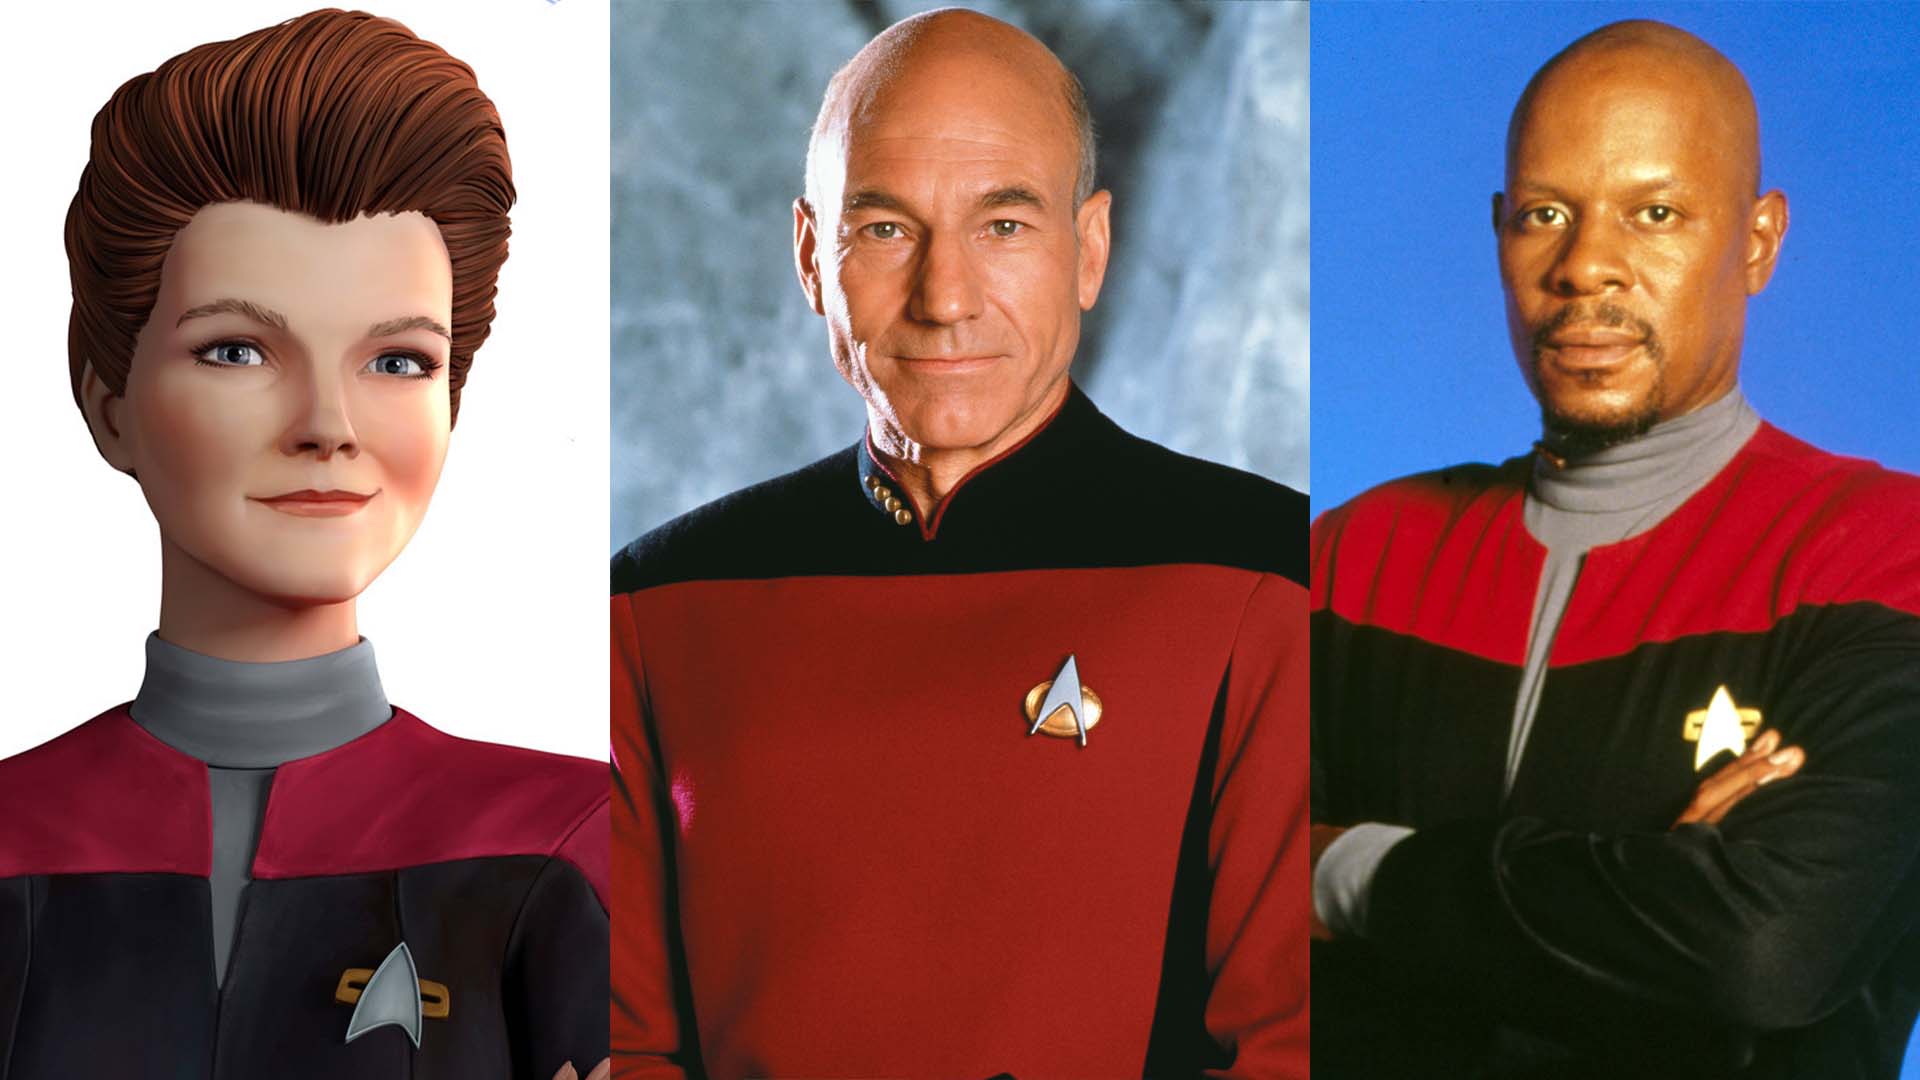 Star Trek: Every TV series ranked, from TOS to Prodigy